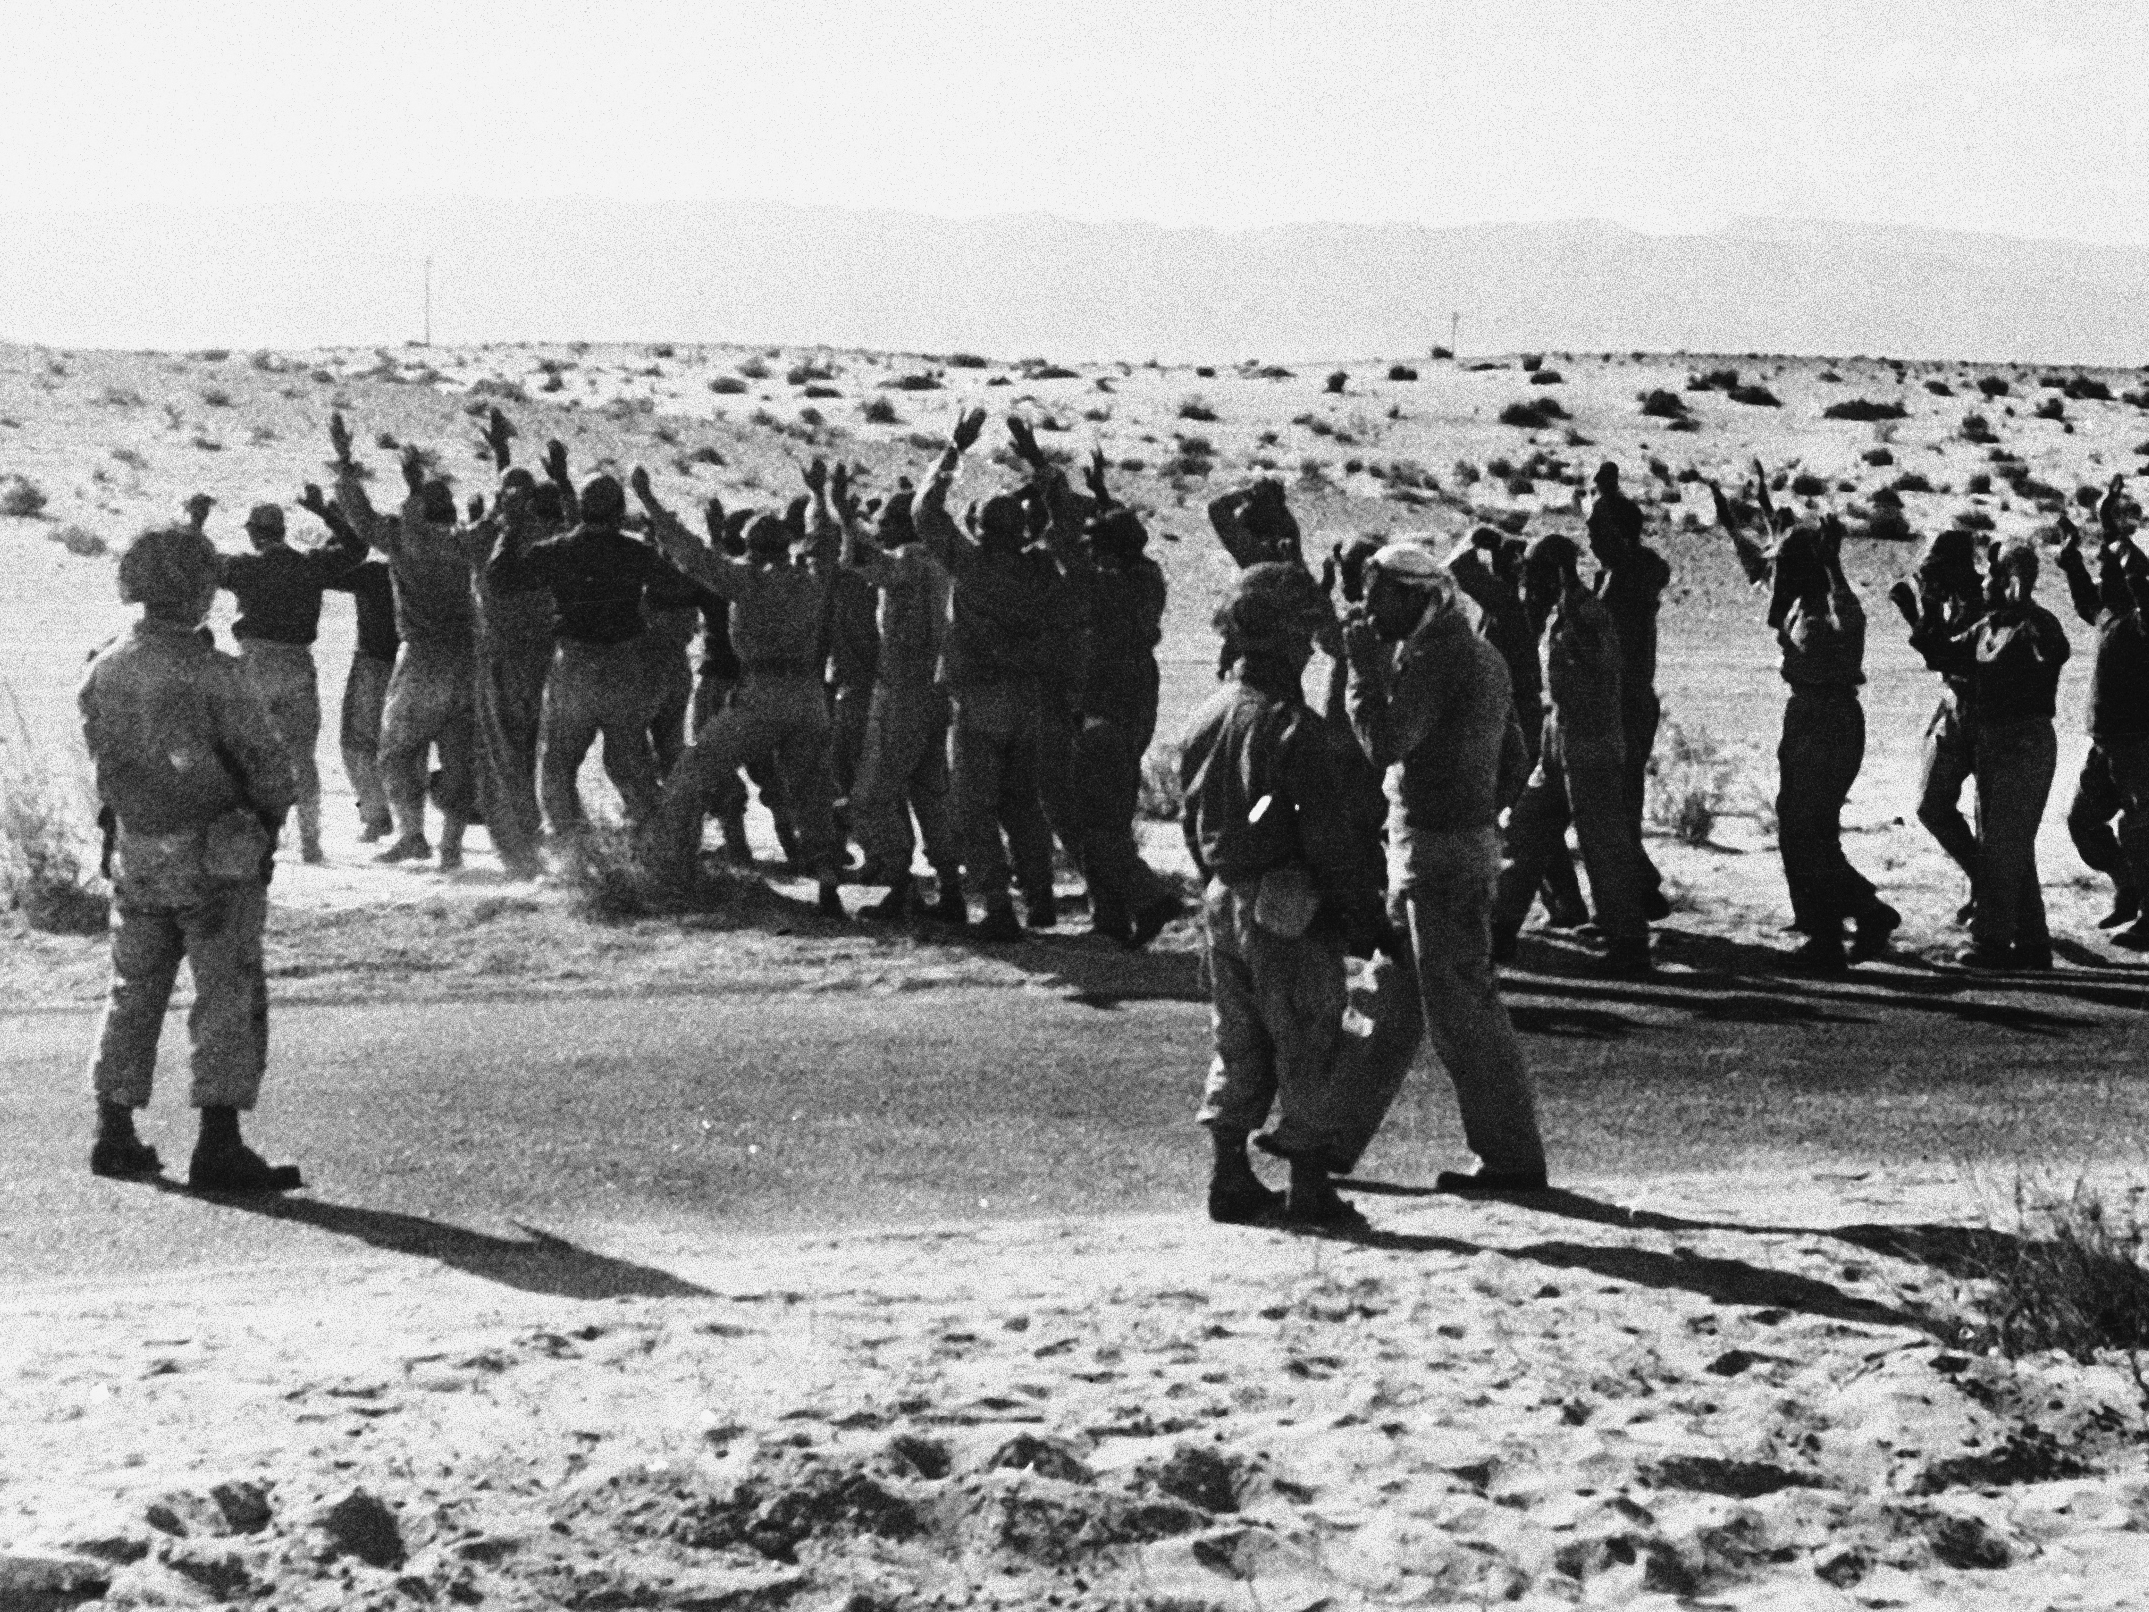 Israeli troops round up Egyptian soldiers captured during fighting in 1956 in the Rafah area of the Gaza Strip, which was controlled by Egypt at the time. Israel, Britain and France invaded Egyptian territory after Egypt moved to nationalize the Suez Canal. But U.S. President Dwight Eisenhower intervened, leading to the withdrawal of foreign troops, including the Israeli forces in Gaza.